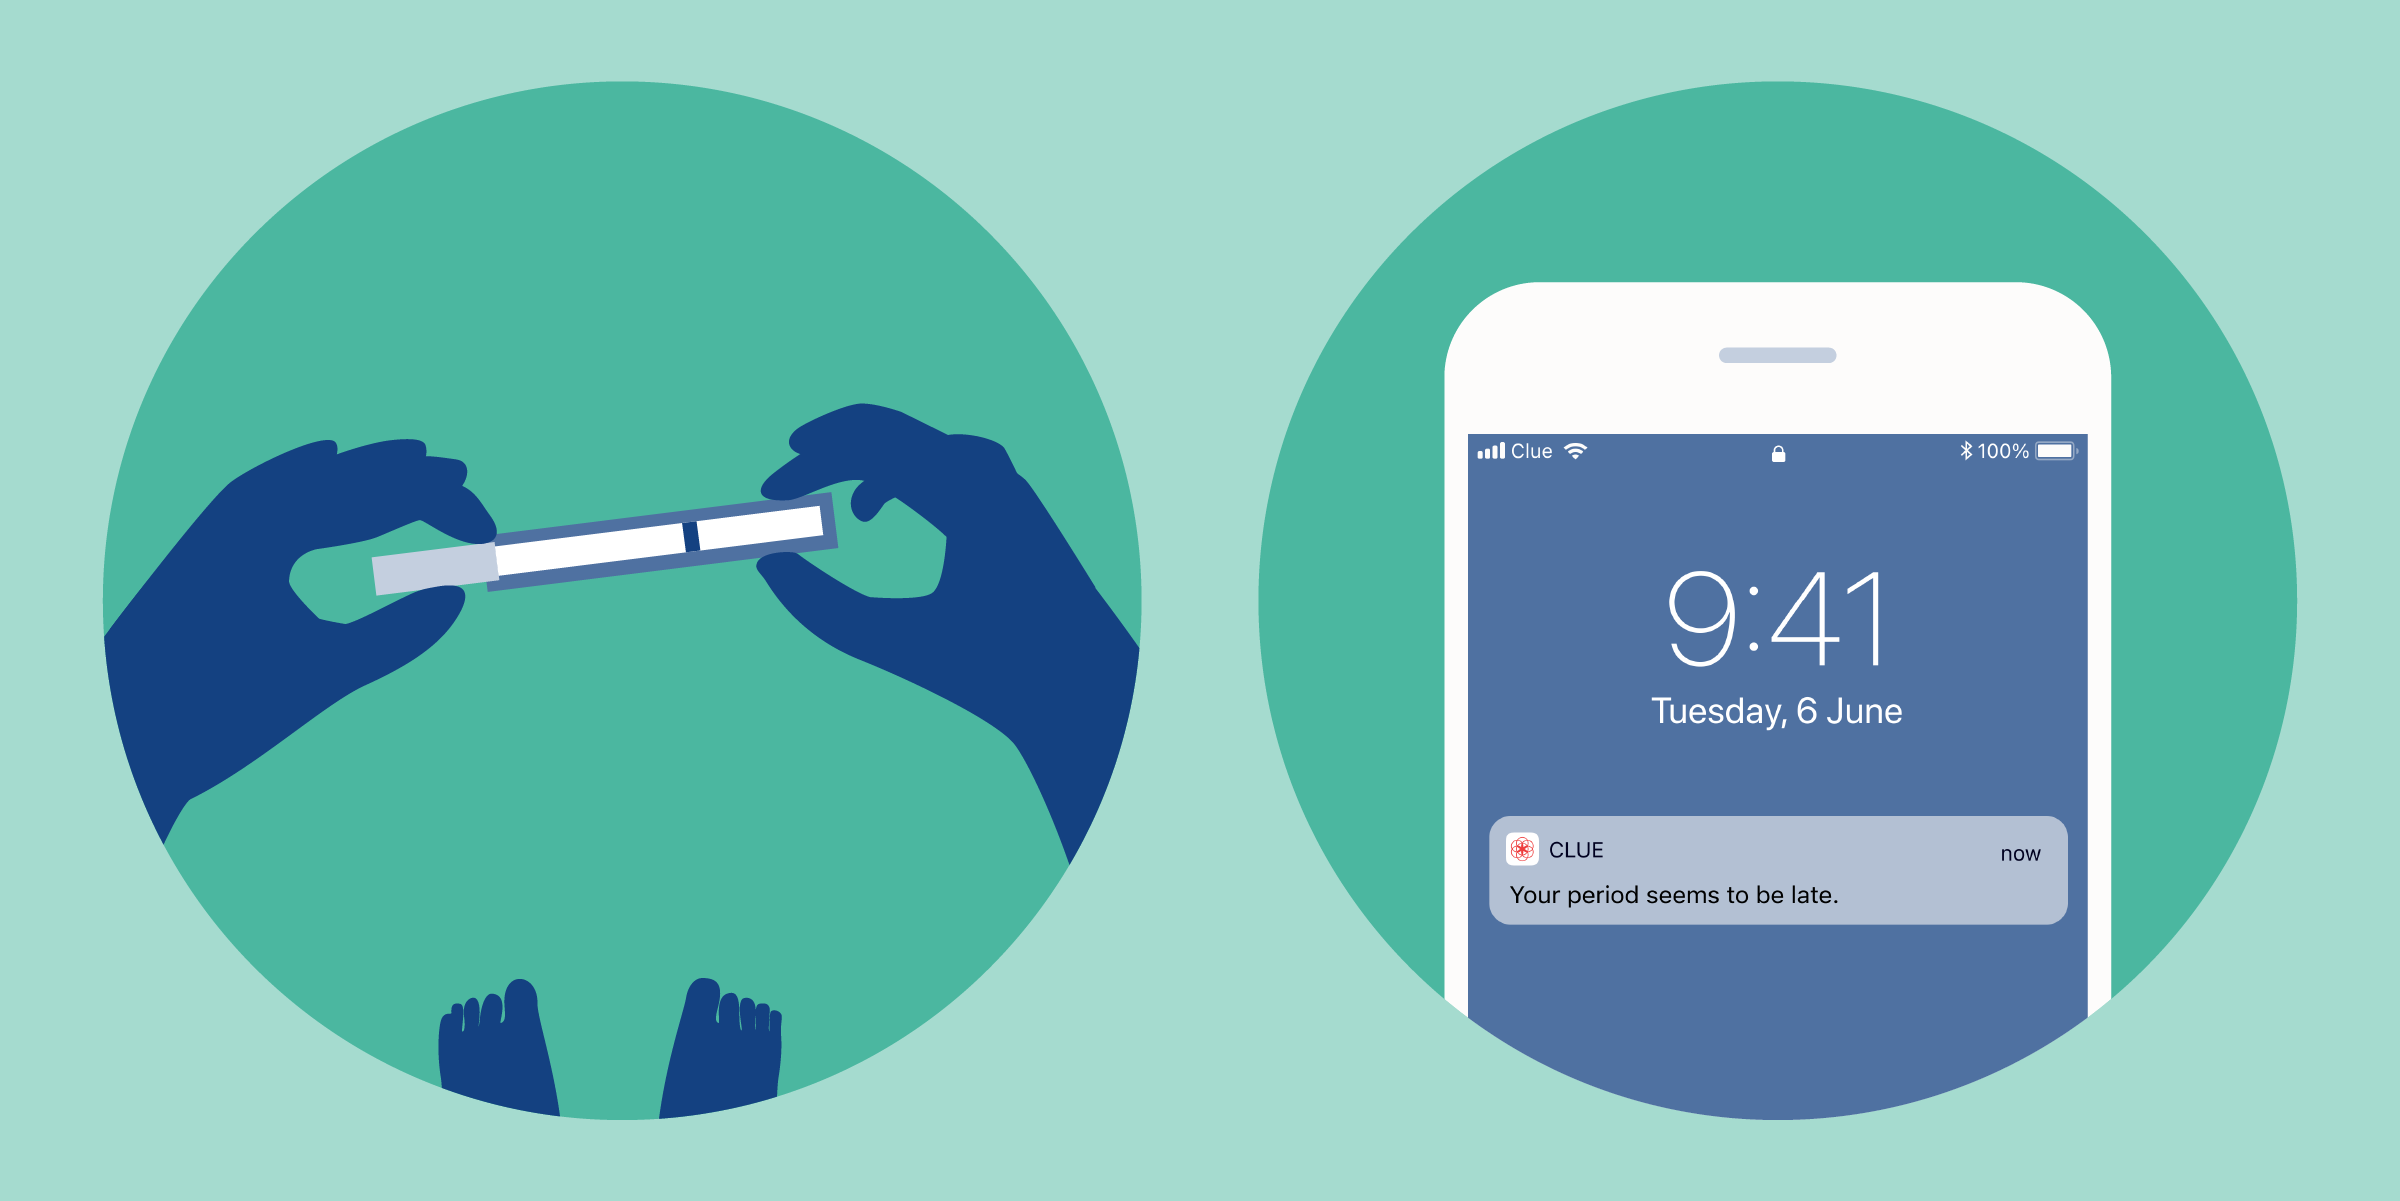 Illustrations of a pregnancy test and Clue app with a "period late" notification